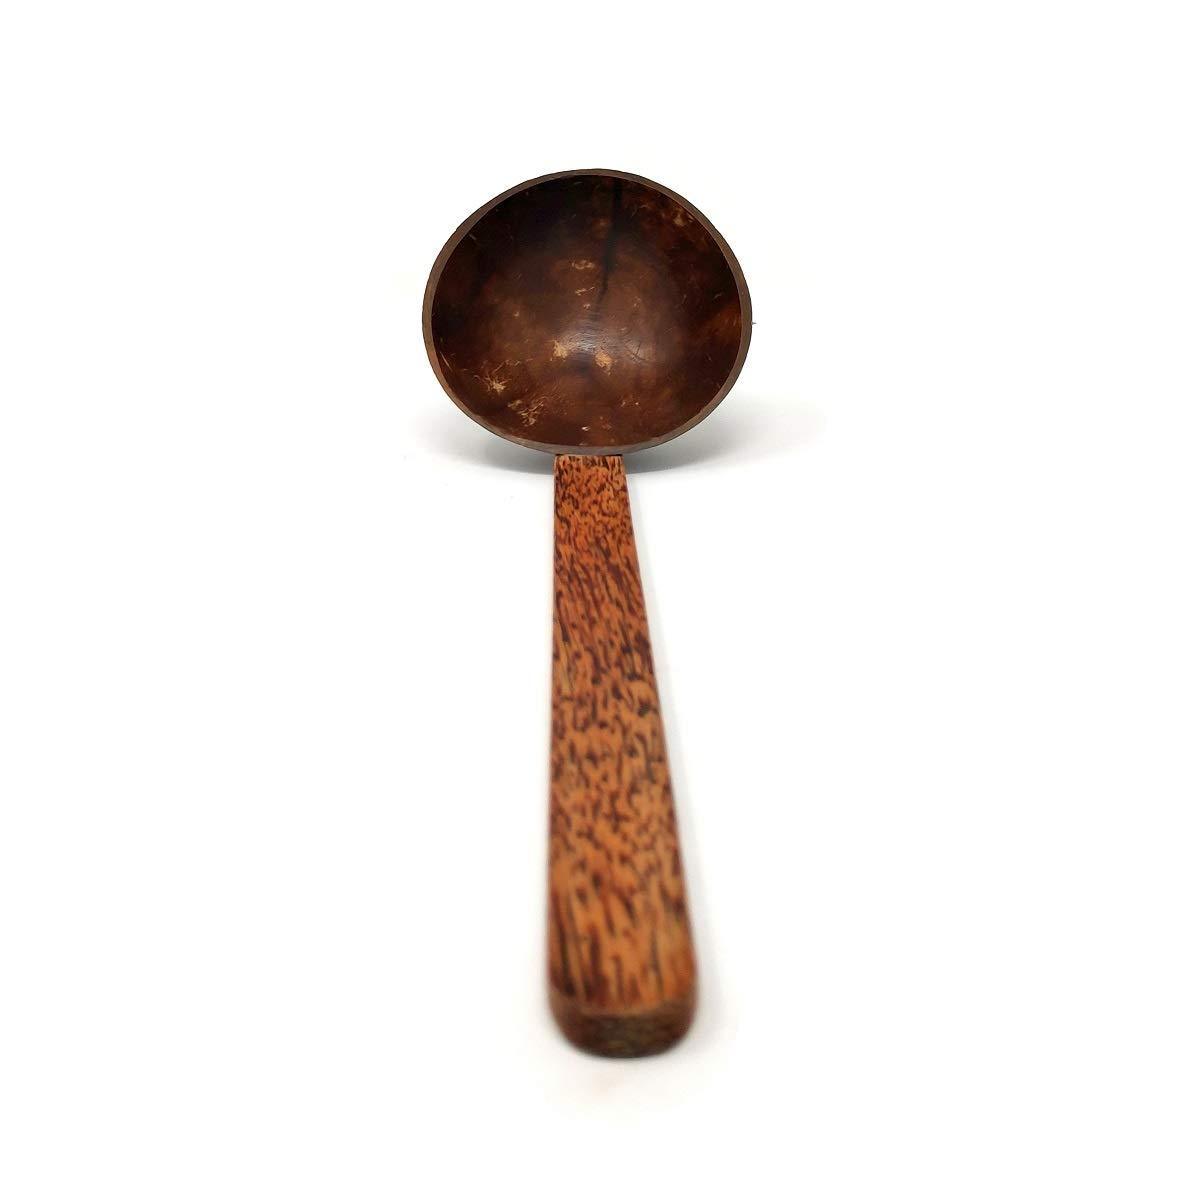 Large Coconut Shell Rice Serving Spoon/Ladle/Spatula- Natural - Organic - Hand Made - Made from Coconut Shell and Coconut Wood - www.indiancart.com.au - Spoons - - Indian Cart